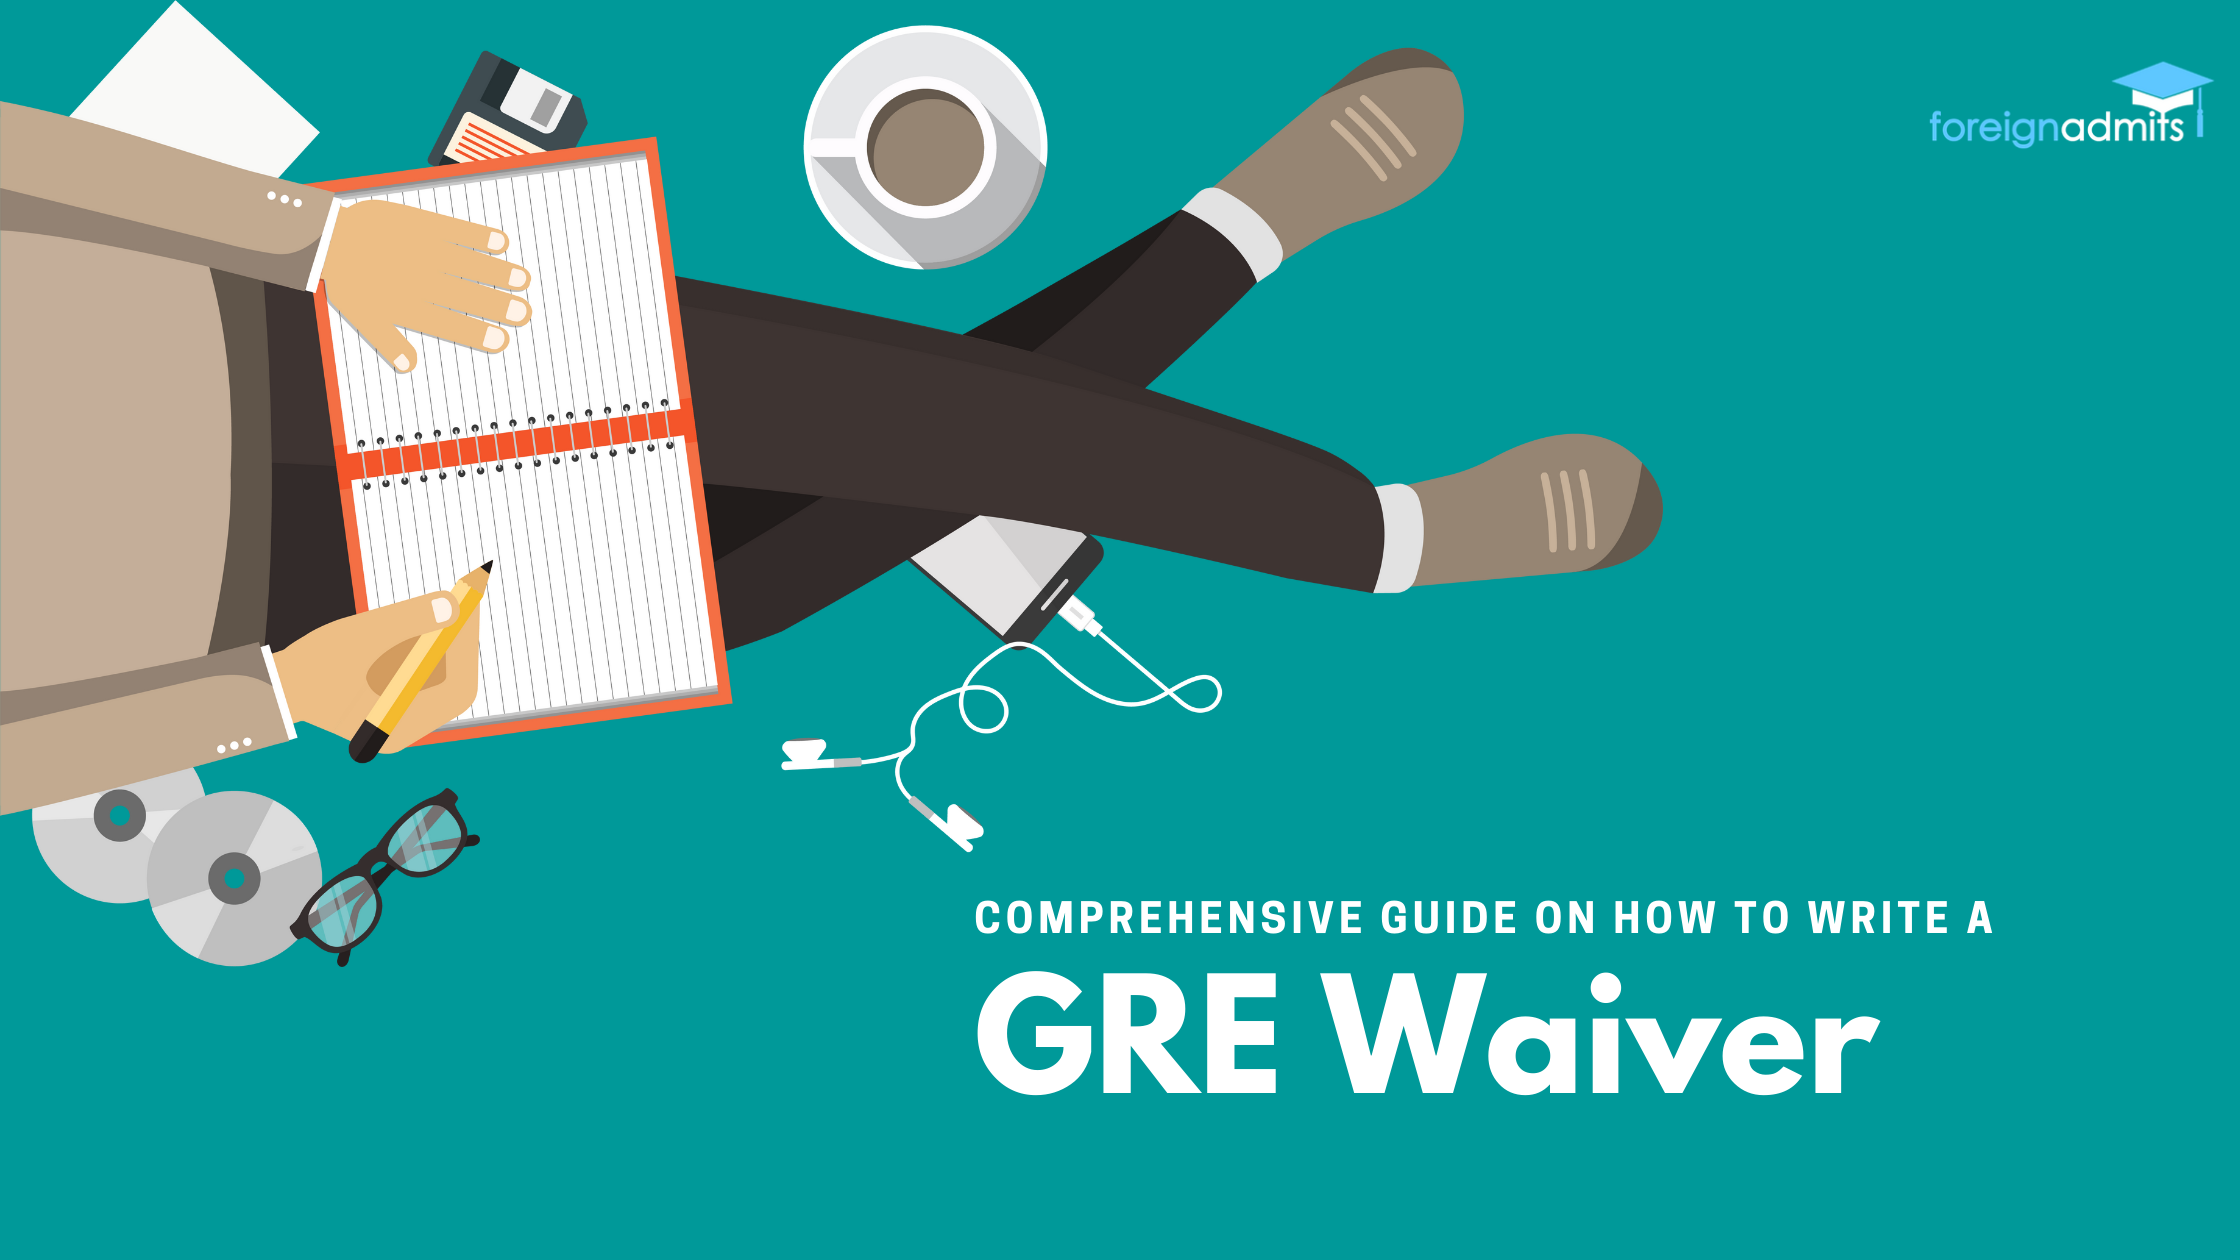 GRE Waiver – A Comprehensive Guide